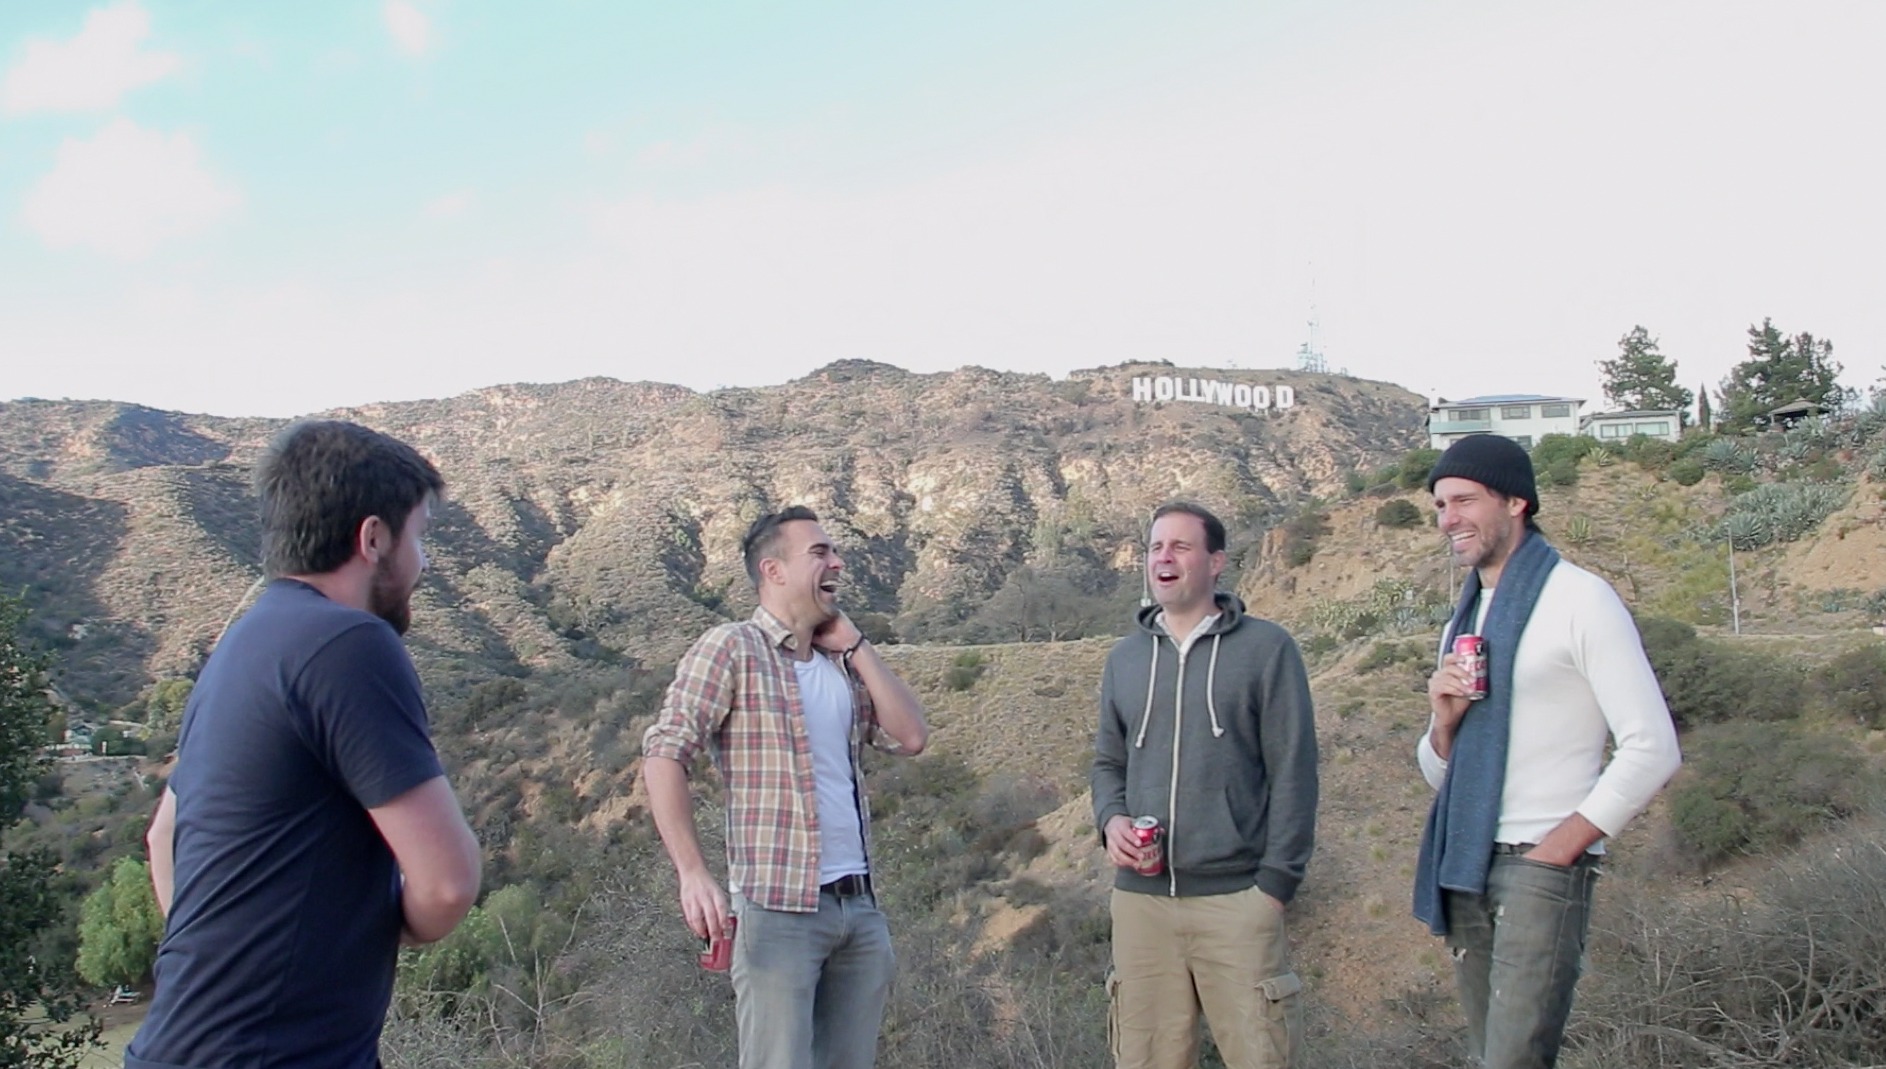 MARK RILEY, CRIS RICE, MICHAEL JAMES NELSON, DAVID CLAYTON ROGERS | Rally Episode 3 Hollywood Sign | 2016